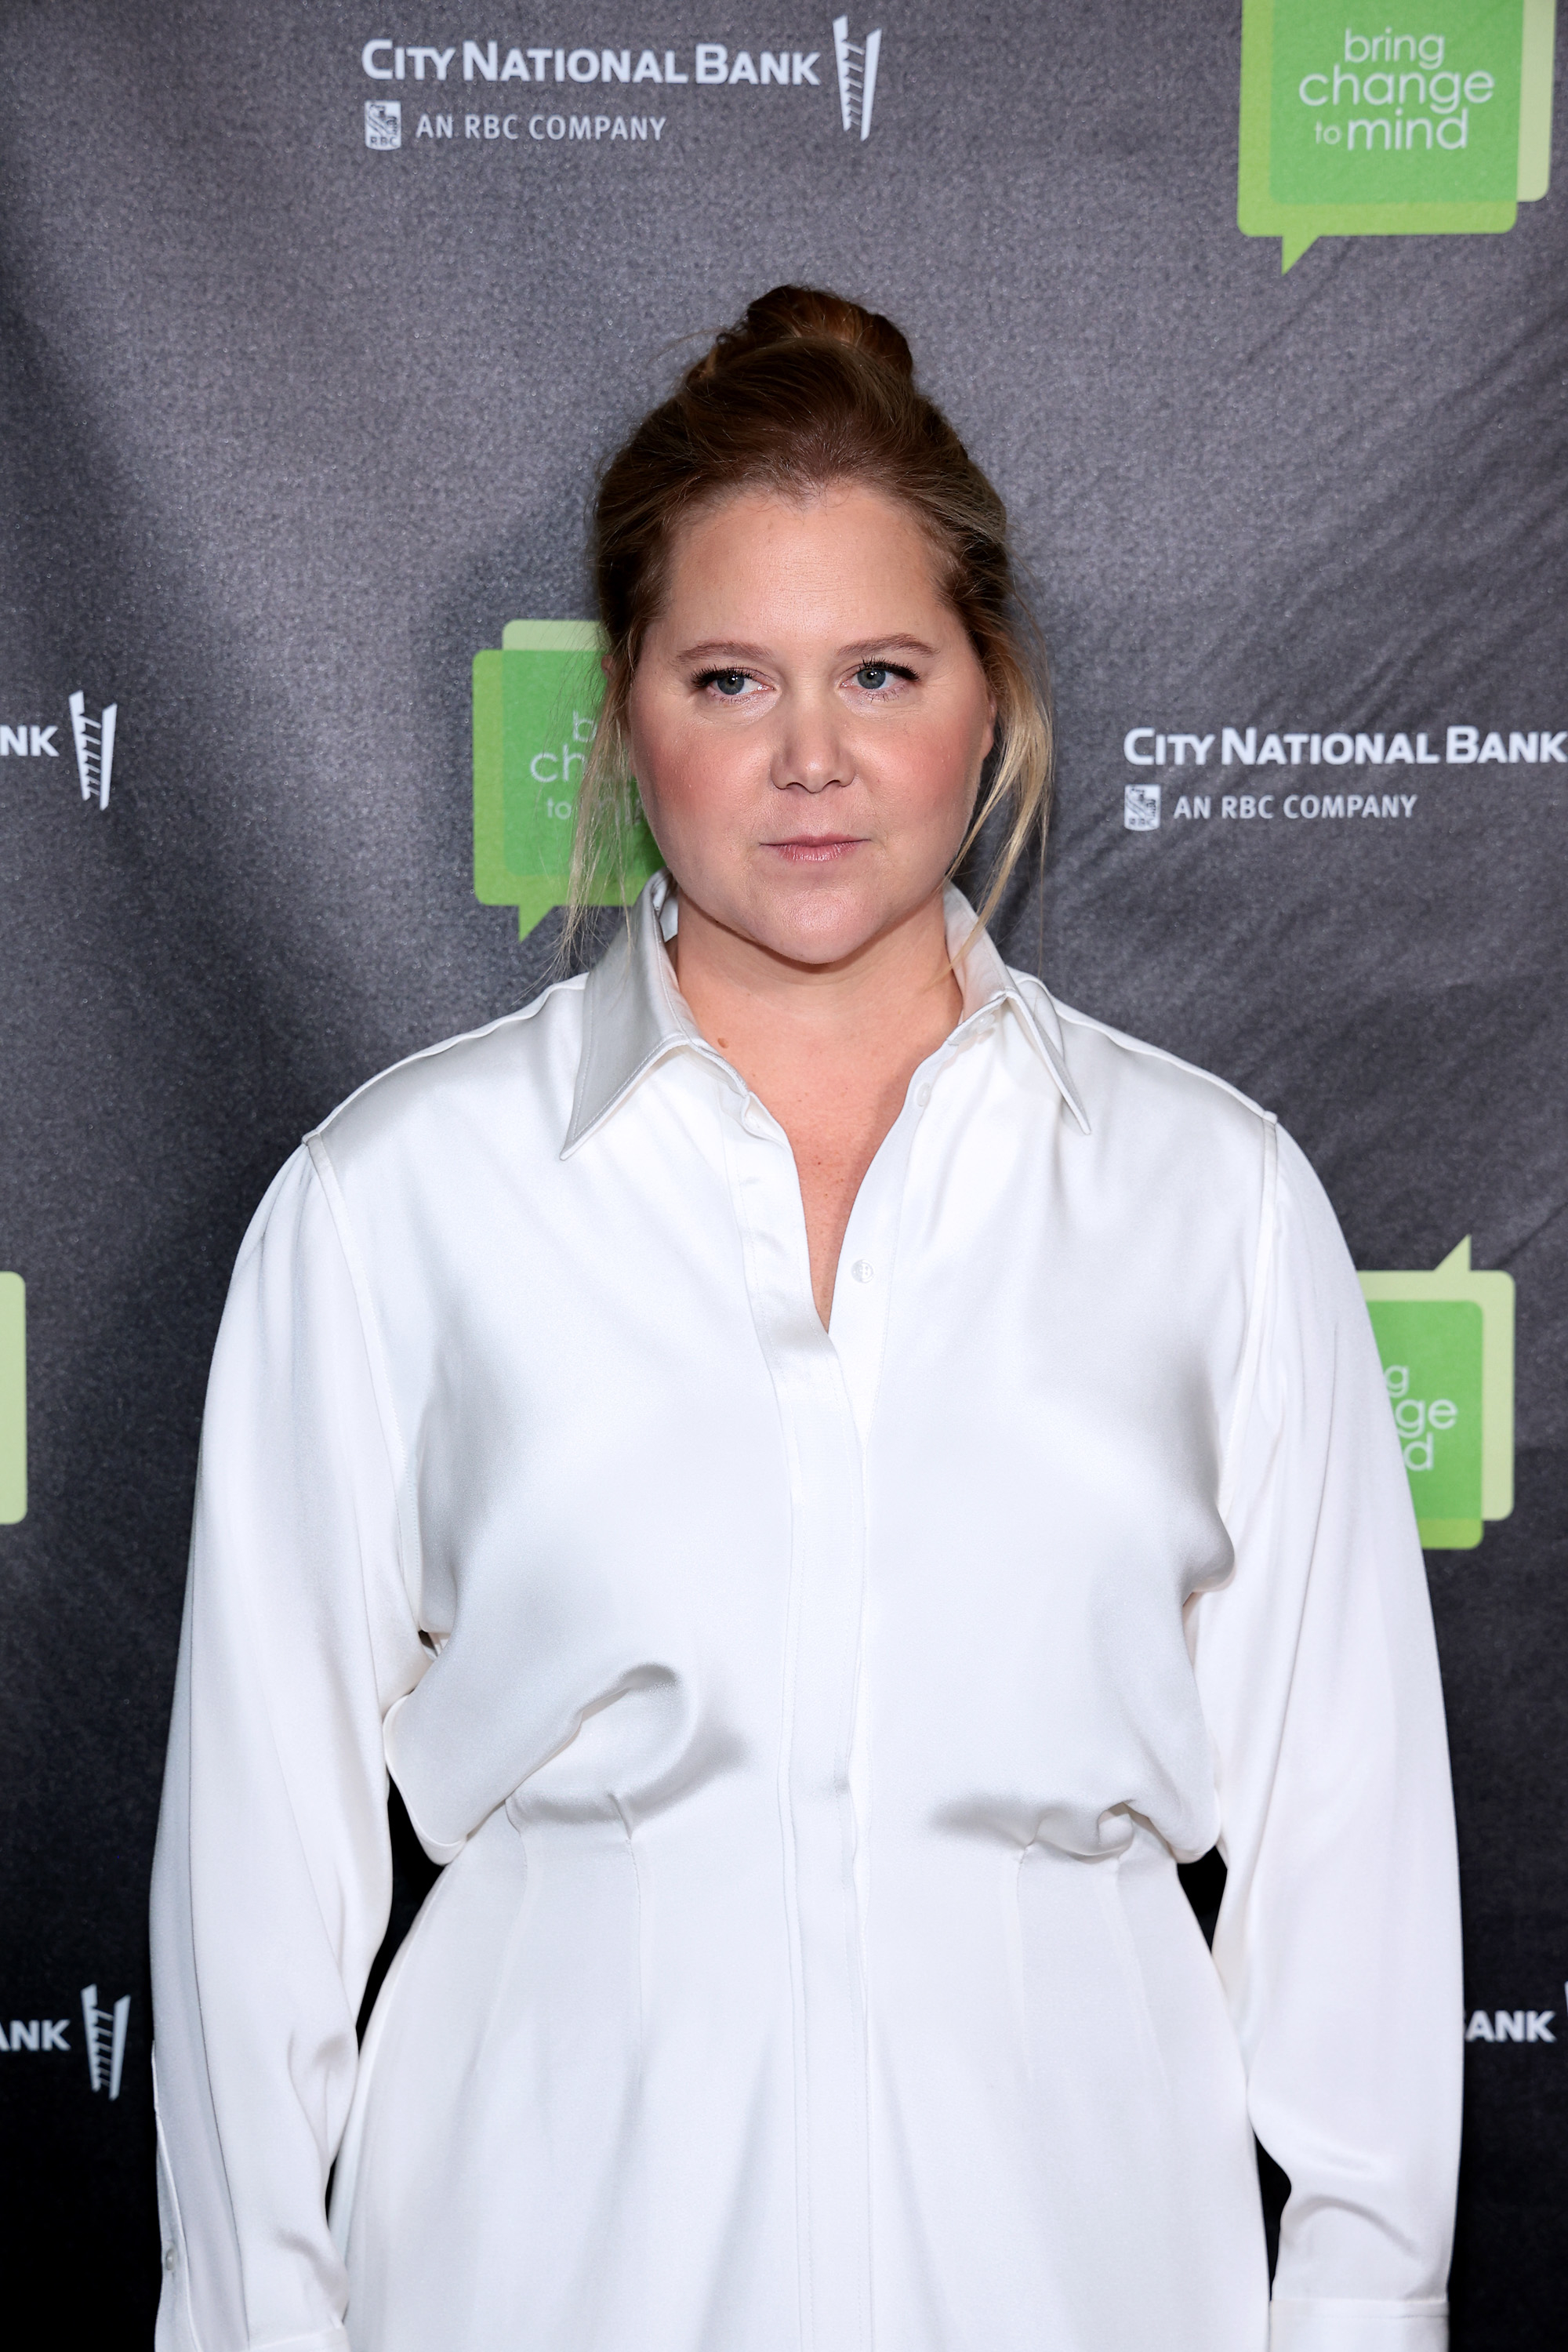 Amy Schumer wearing a white button-up shirt at an event with sponsor banners in the background